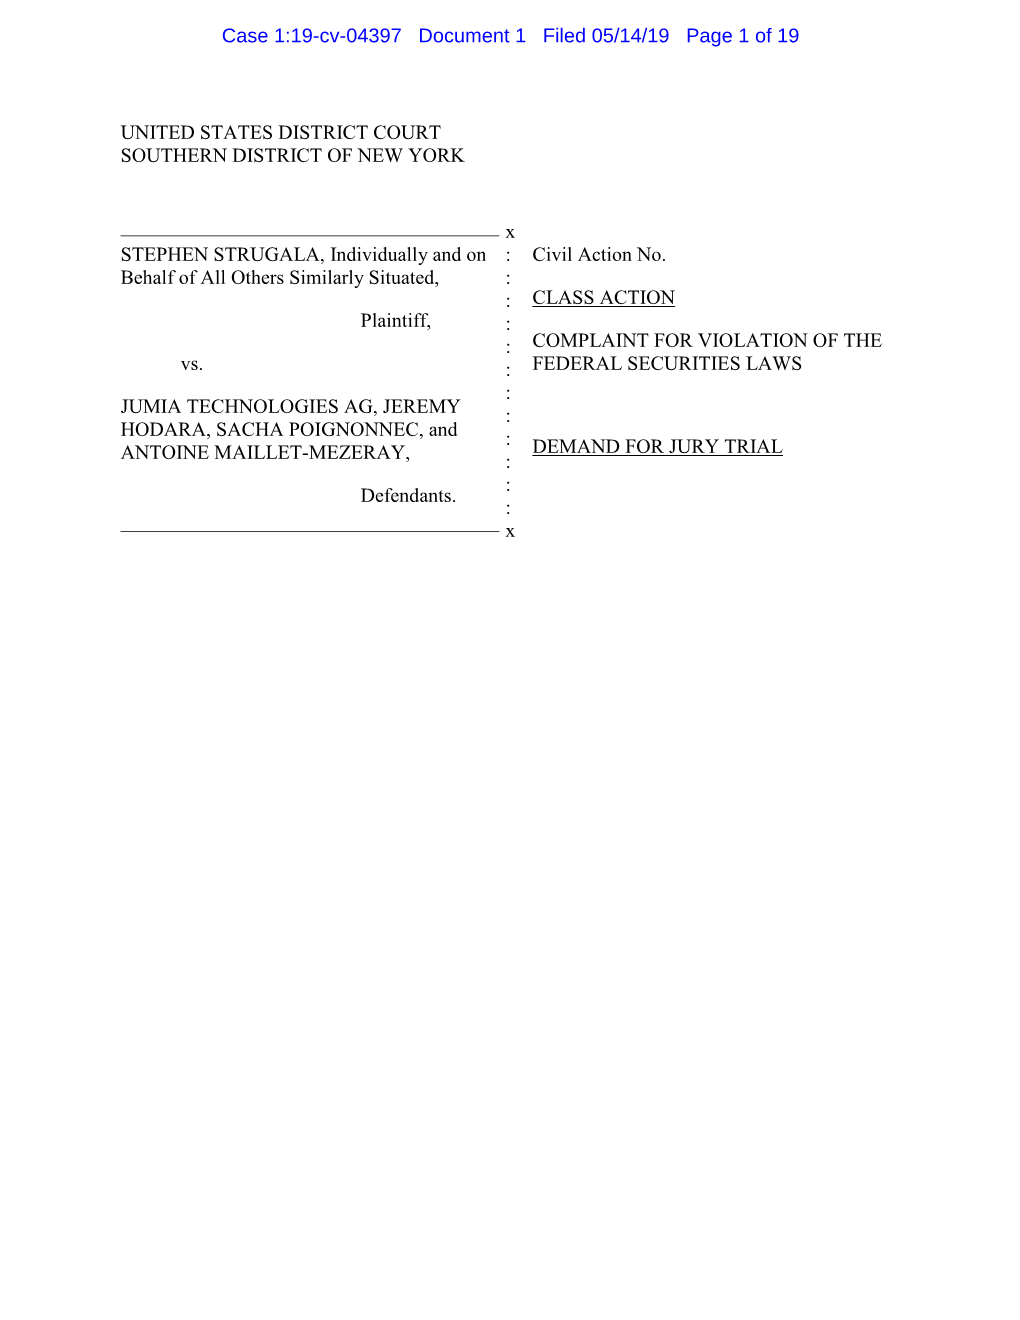 Case 1:19-Cv-04397 Document 1 Filed 05/14/19 Page 1 of 19